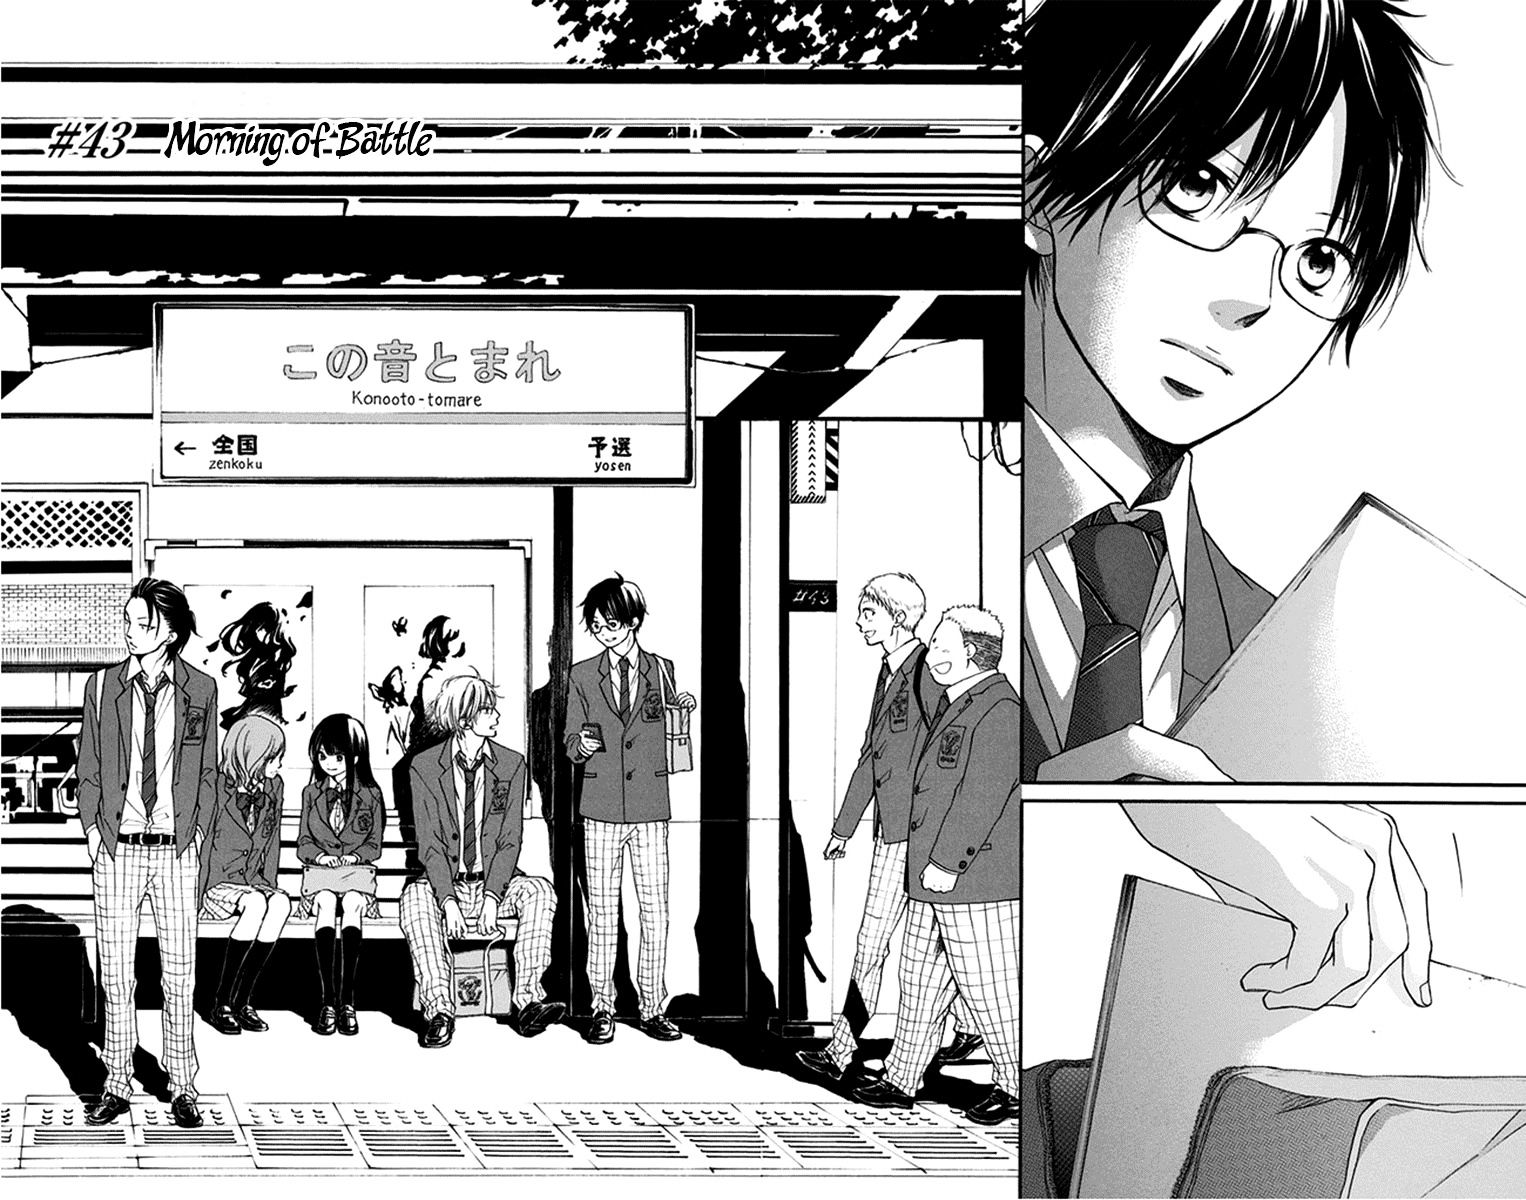 Kono Oto Tomare! Chapter 43 : Morning Of Battle - Picture 2